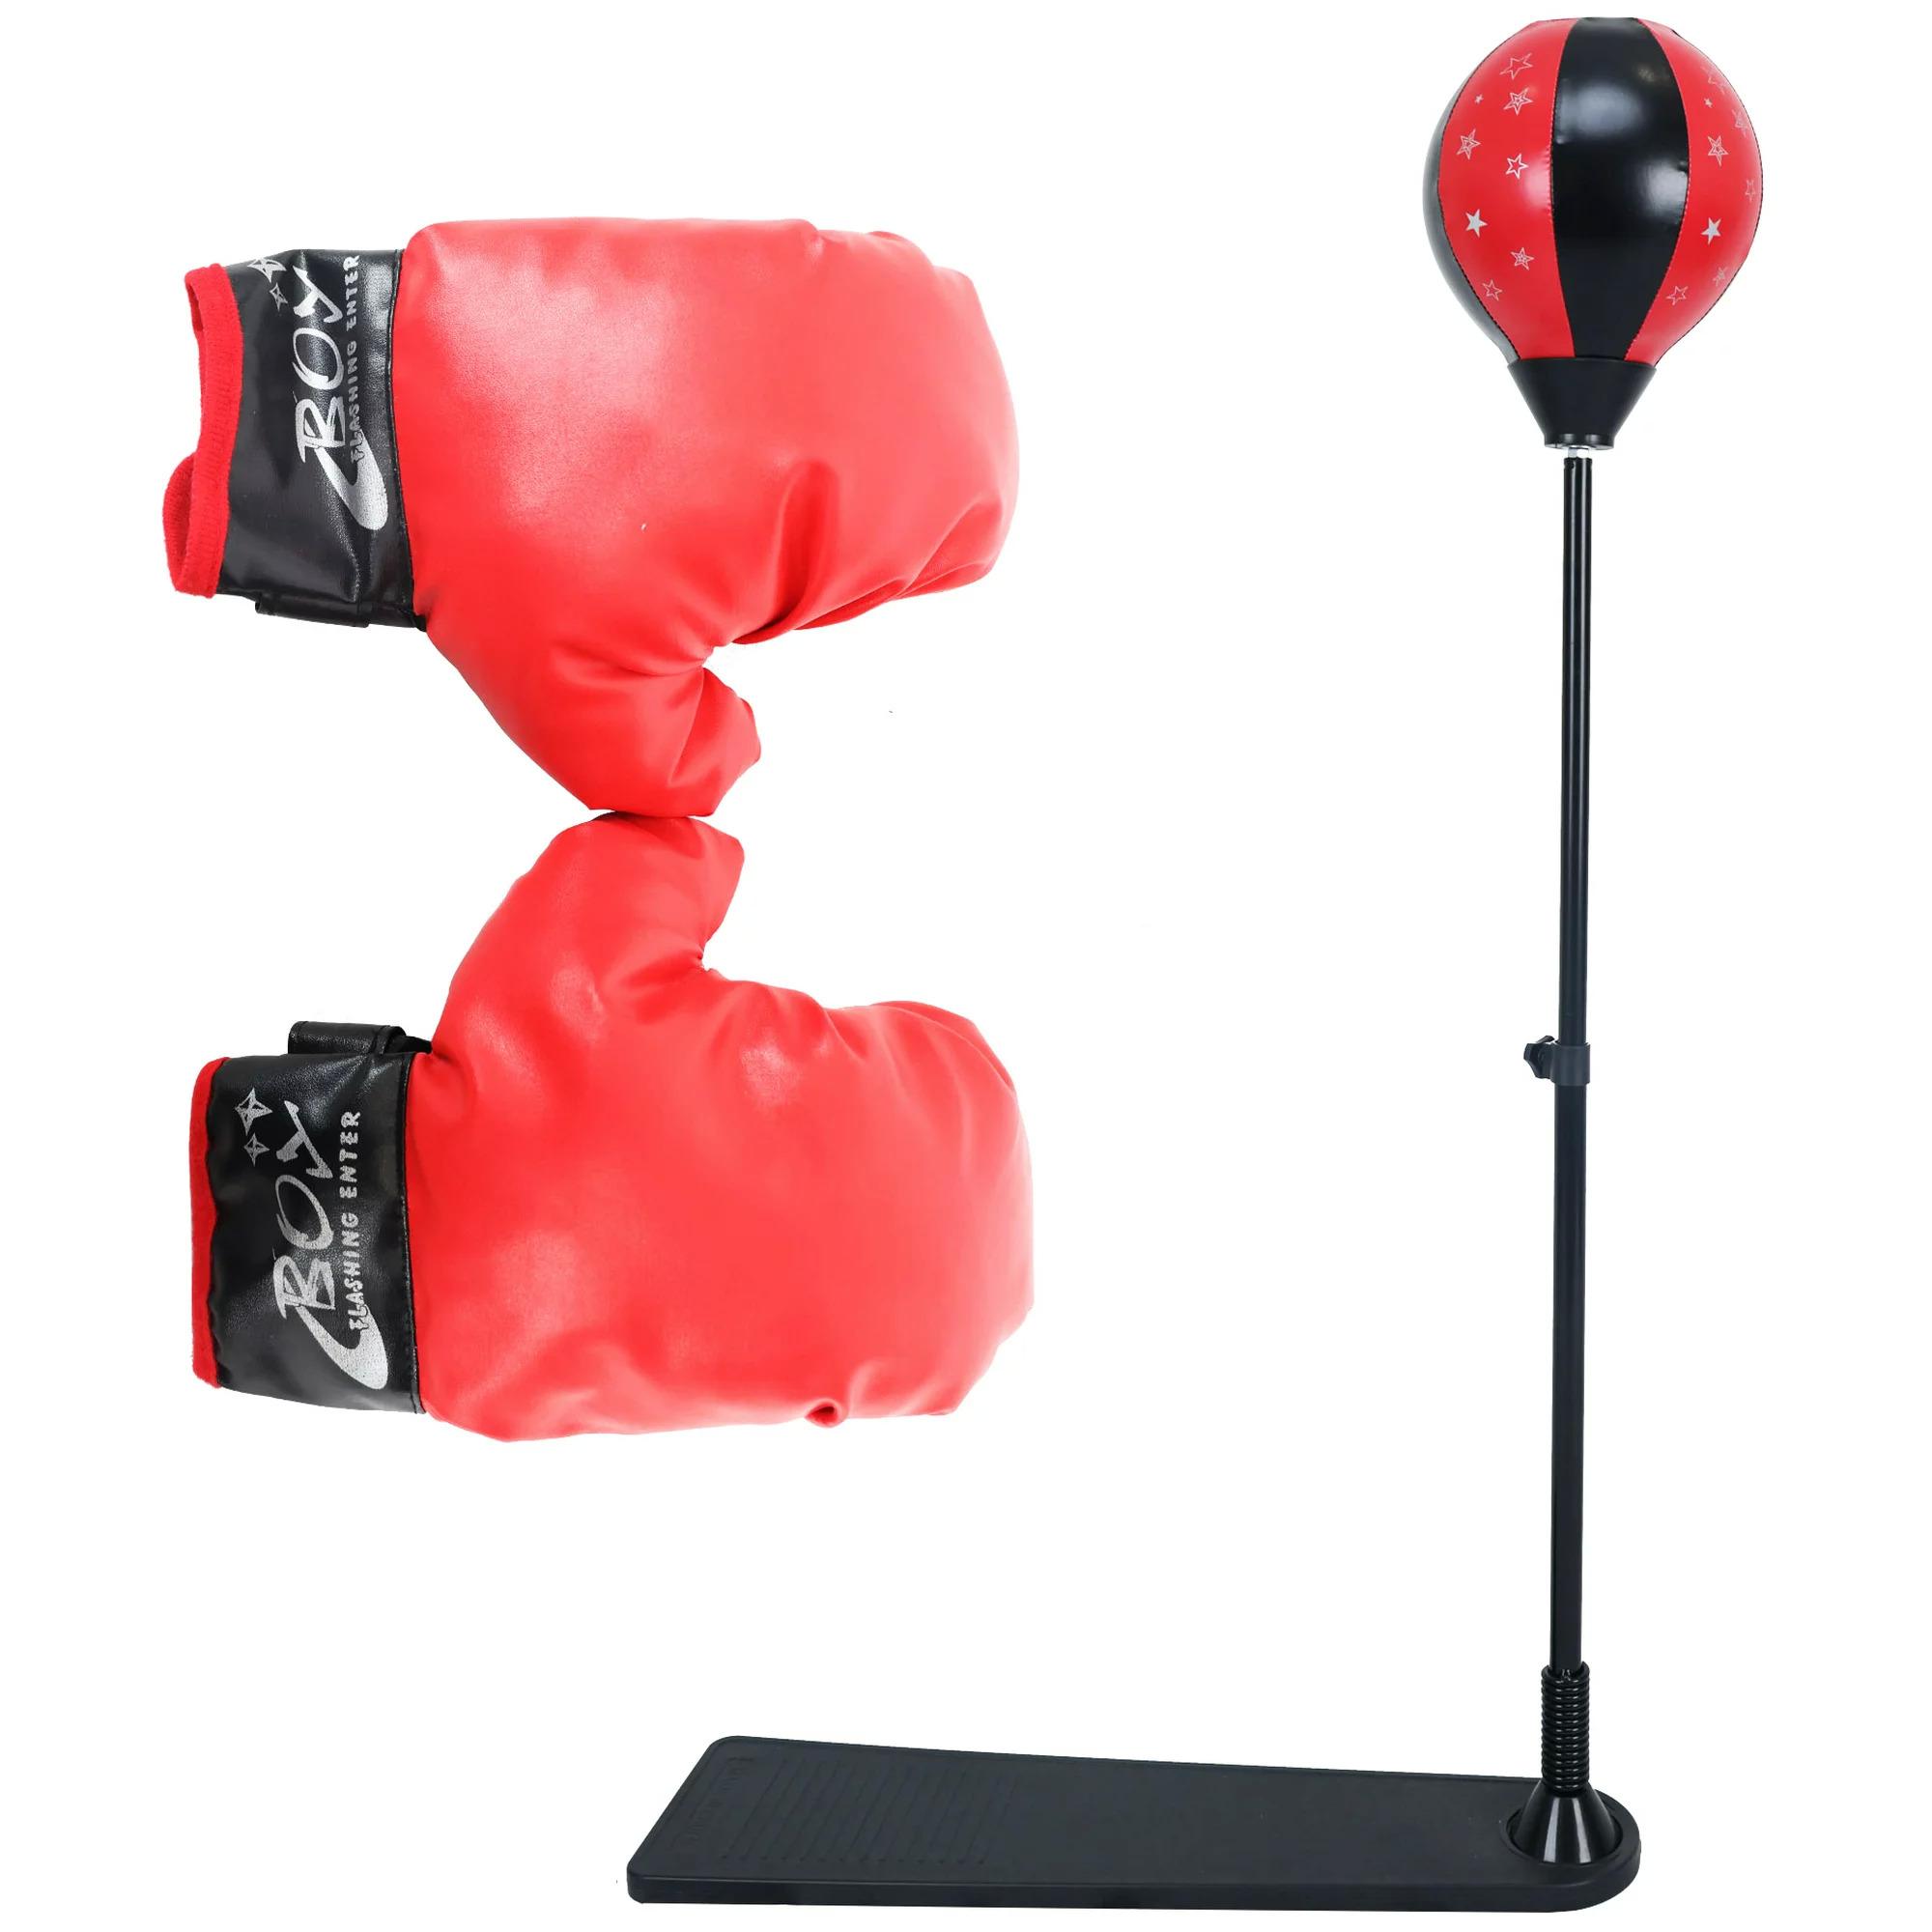 BalanceFrom Punching Bag with Base and Boxing Gloves for $12.97